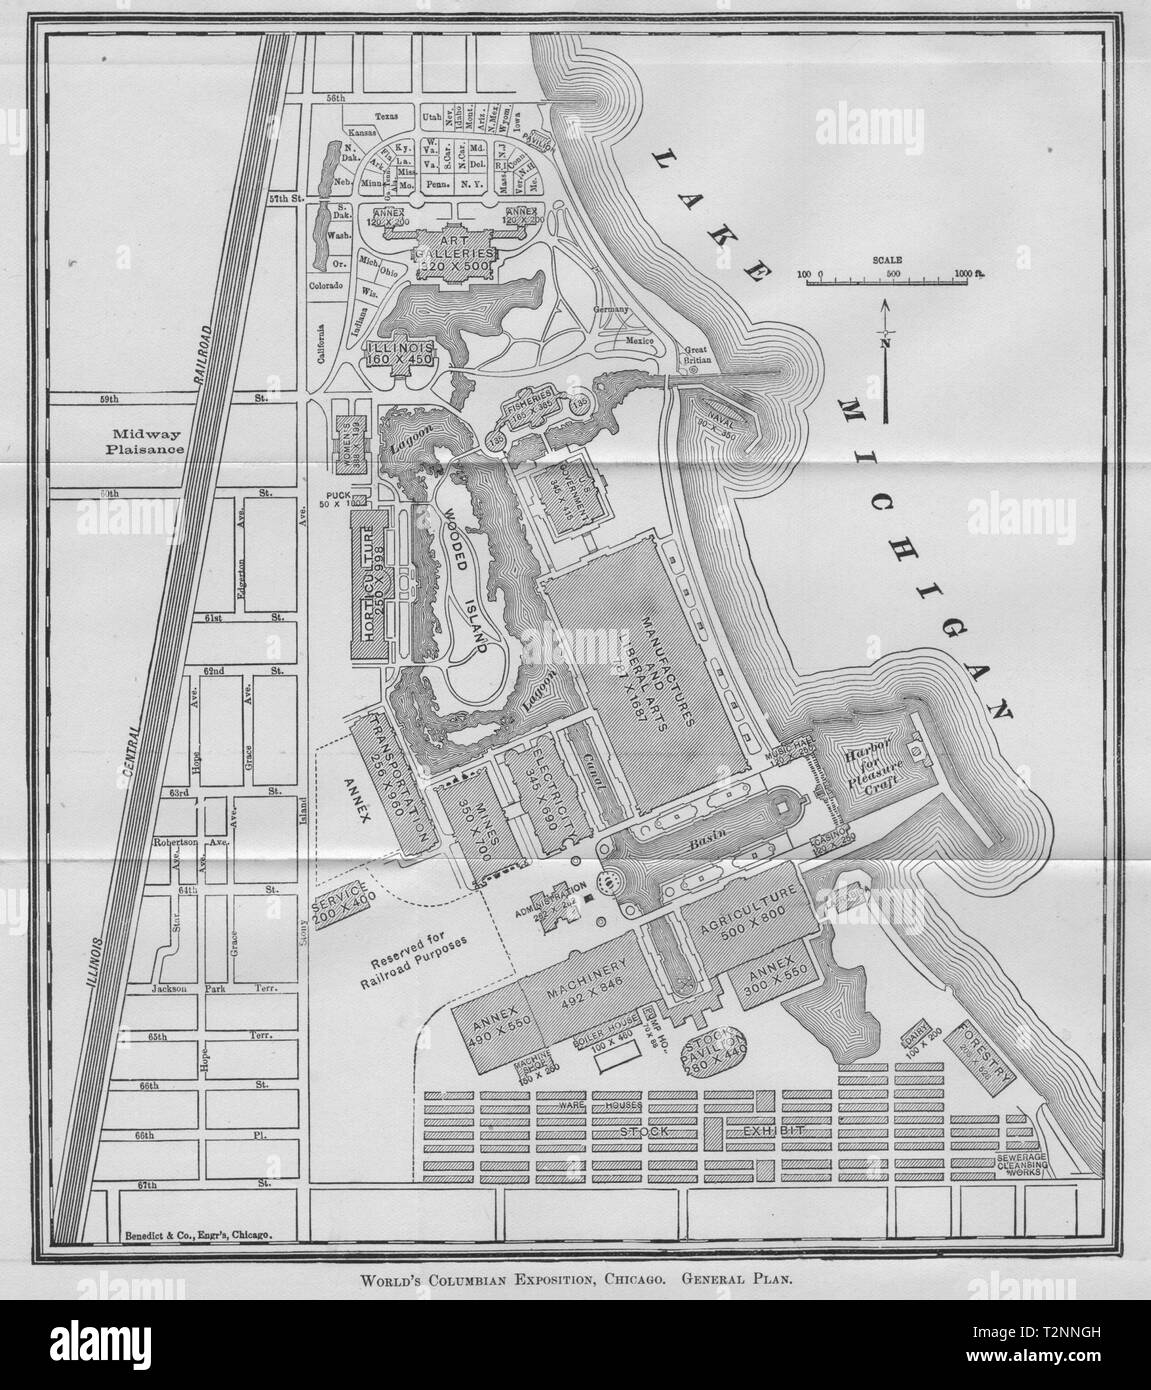 CHICAGO WORLD'S FAIR. World's Columbian Expo (1893) General plan 1893 old map Stock Photo